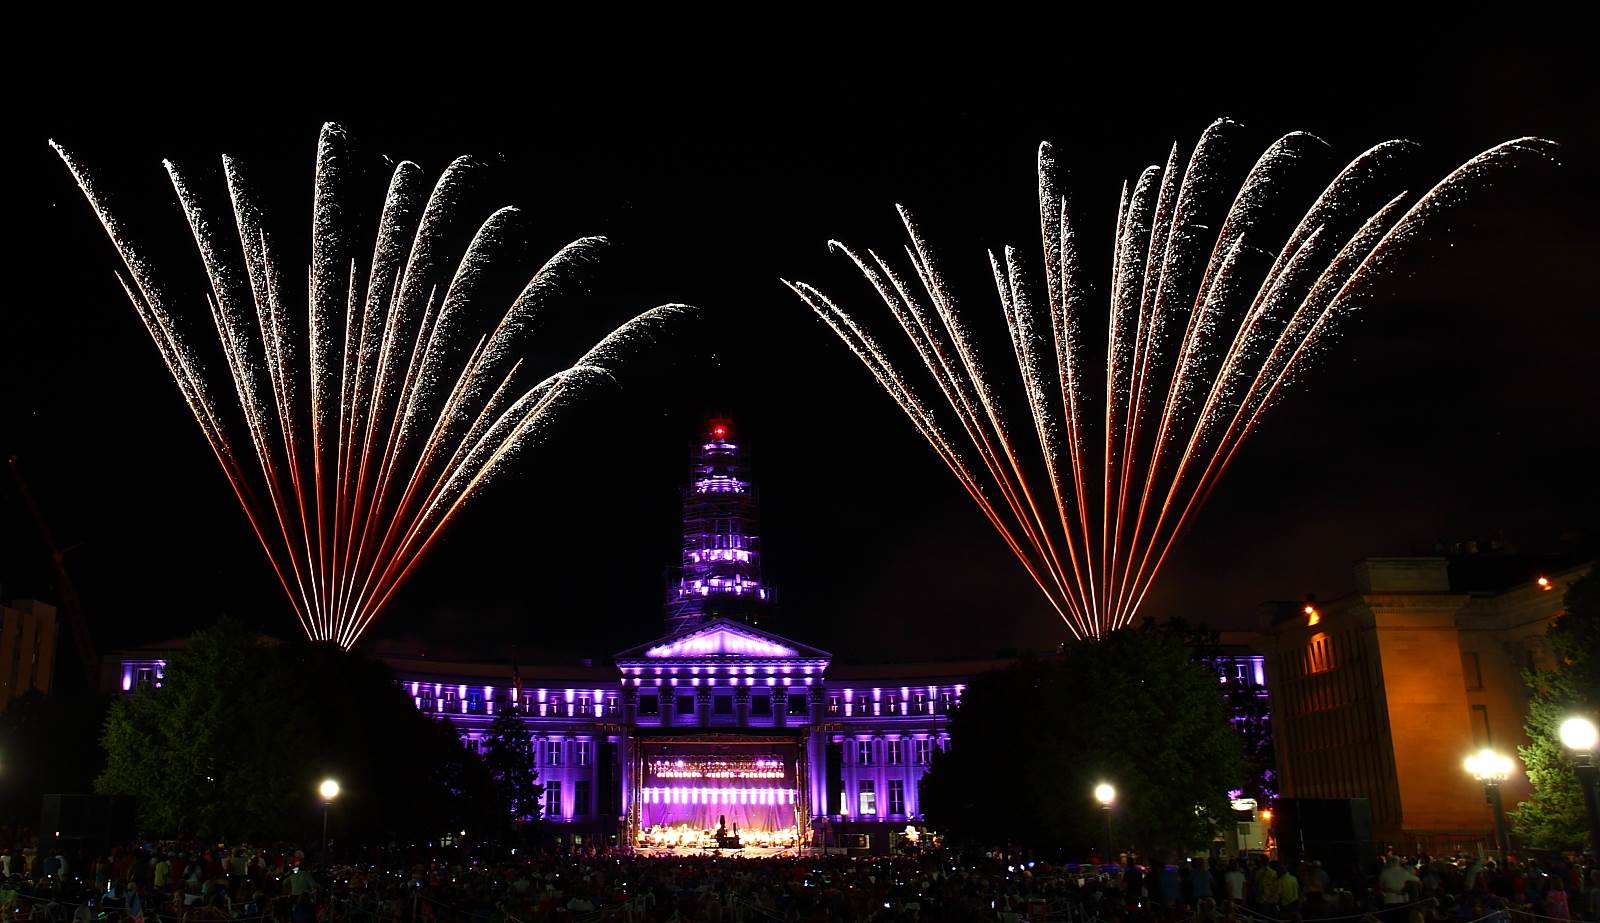 Denver Civic Center Park, 2013 Fireworks over the Denver County Courthouse displayed along with a performance from the Denver Symphony. by Scott Smith Photos